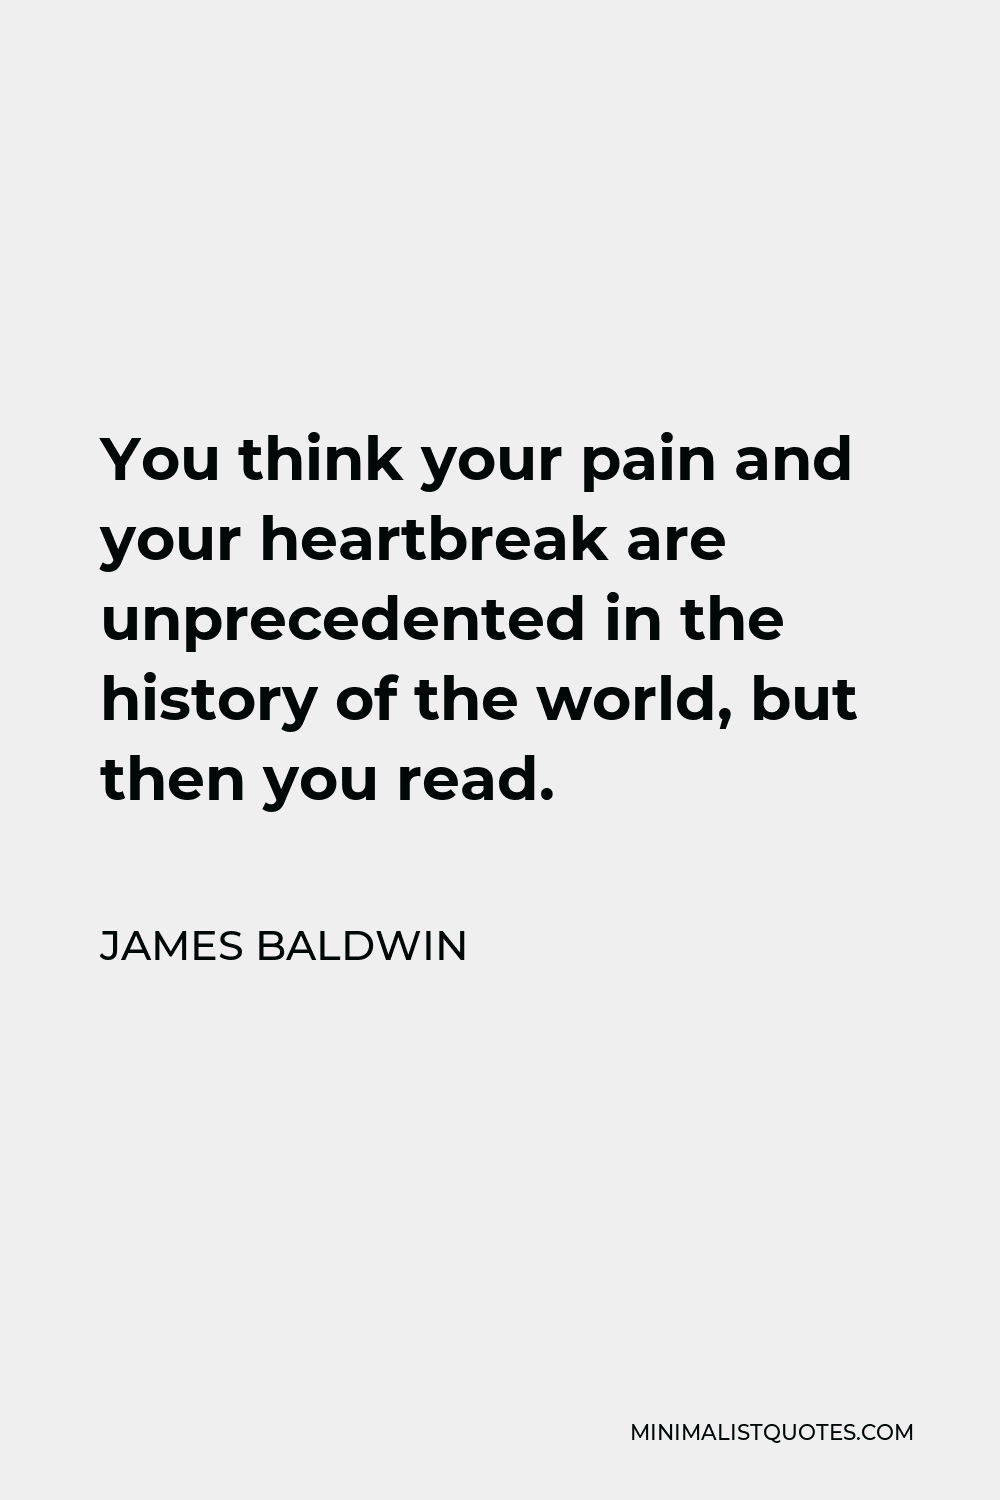 James Baldwin Quote - You think your pain and your heartbreak are unprecedented in the history of the world, but then you read.